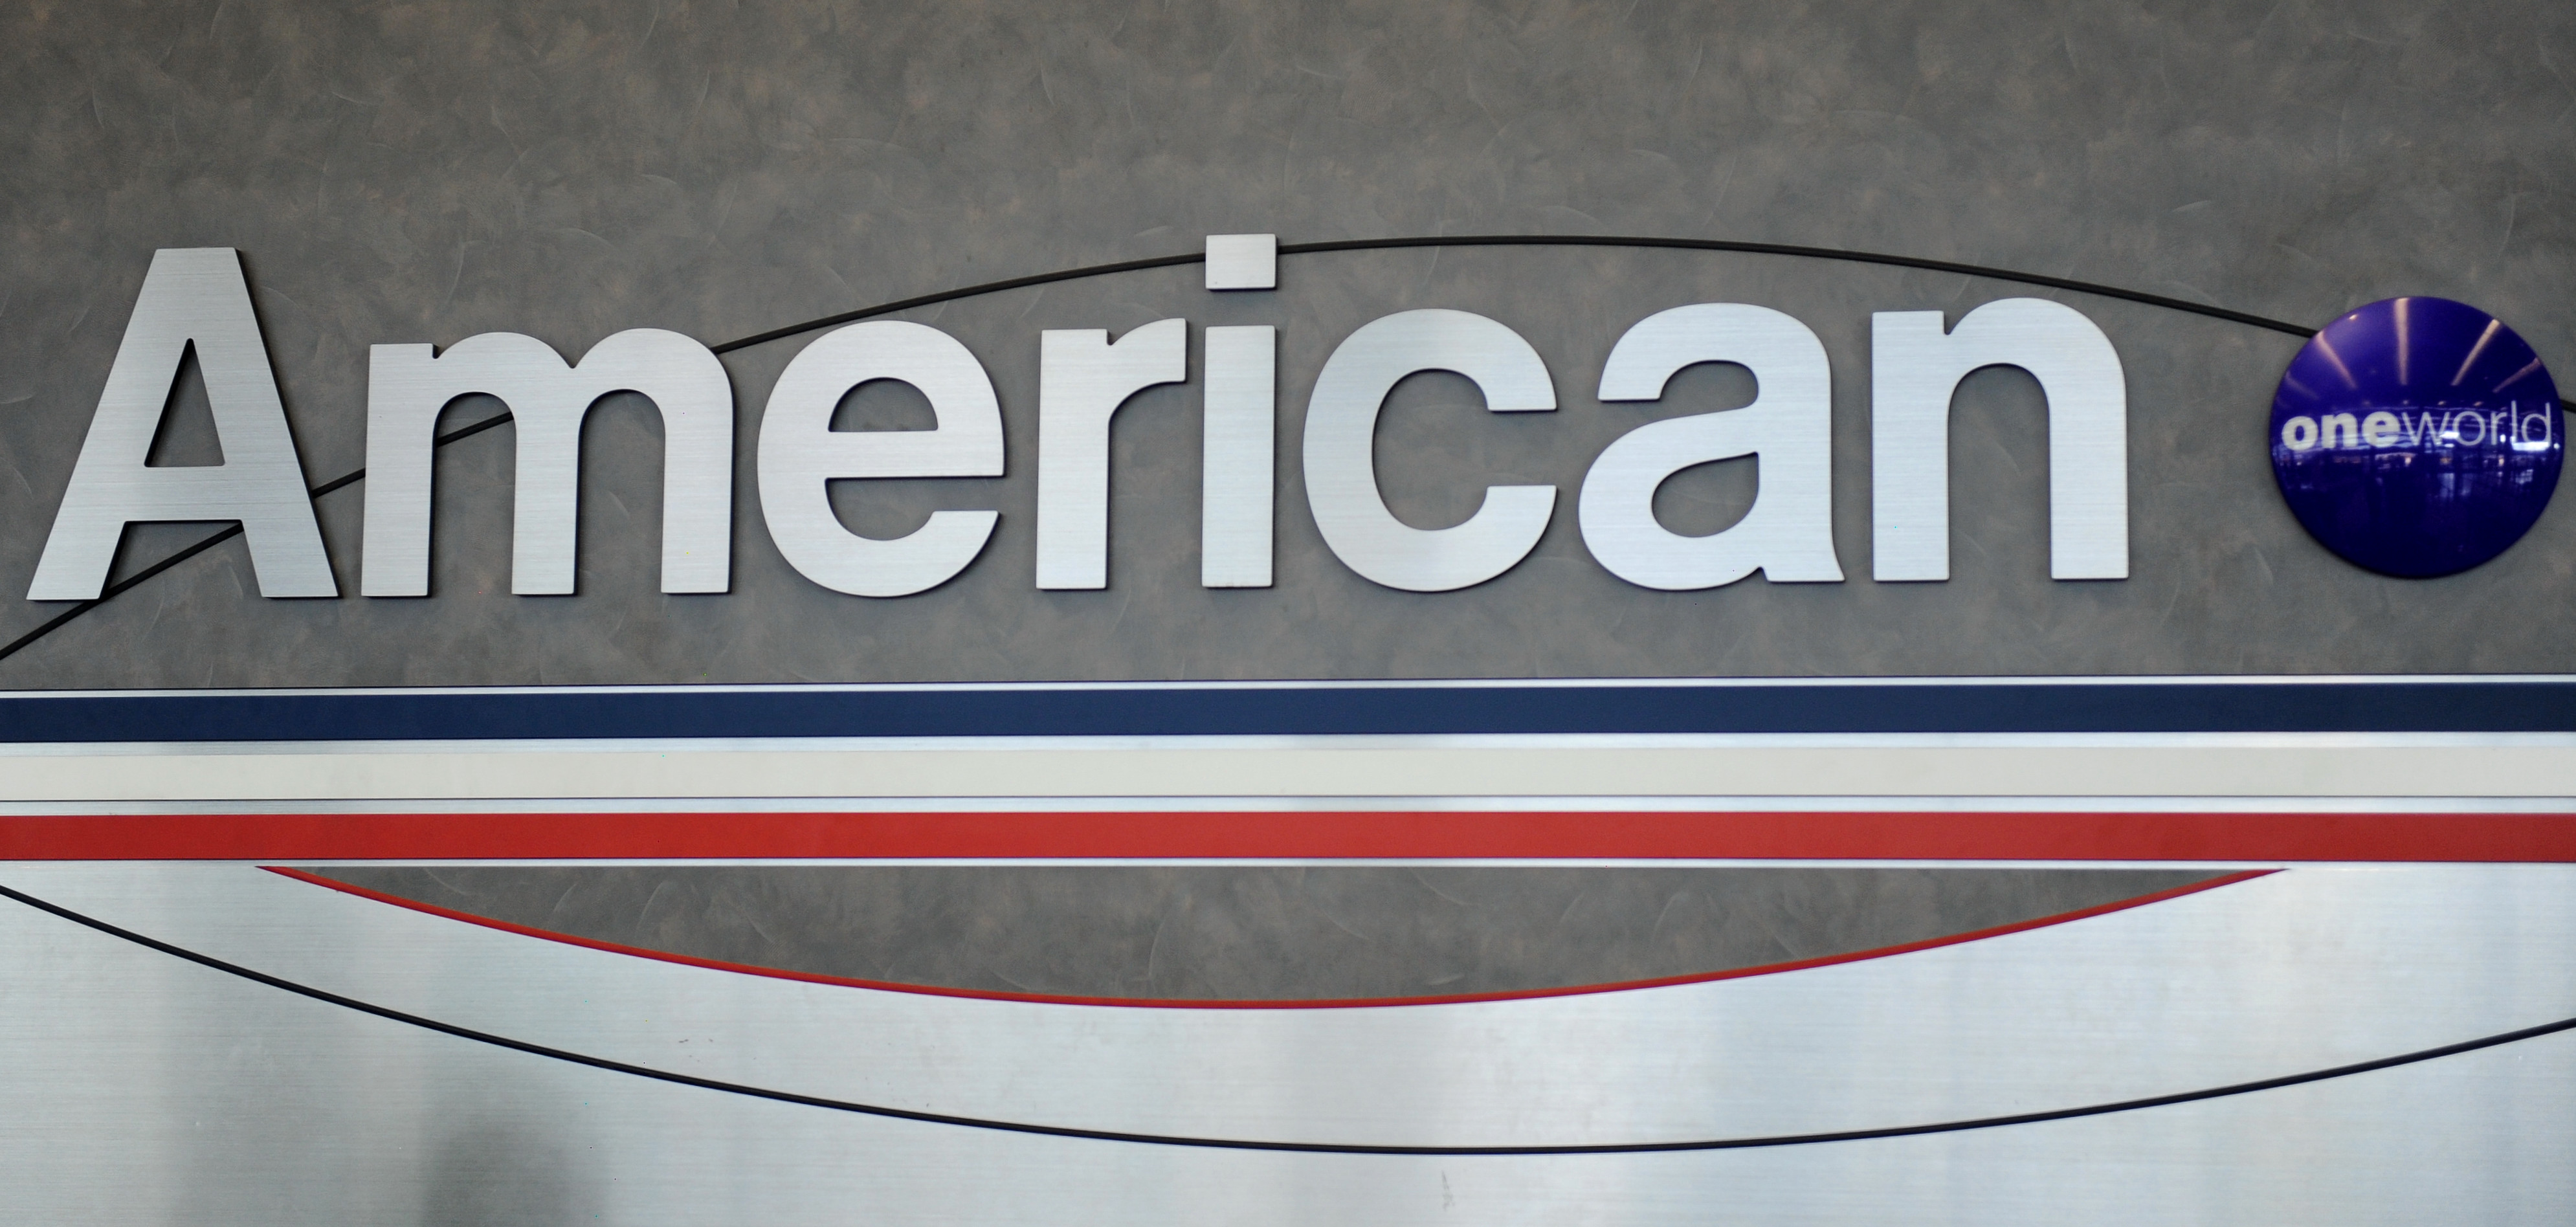 An American Airlines logo is seen behind a ticket counter at Chicago's O'Hare airport on August 13, 2013. (Getty)